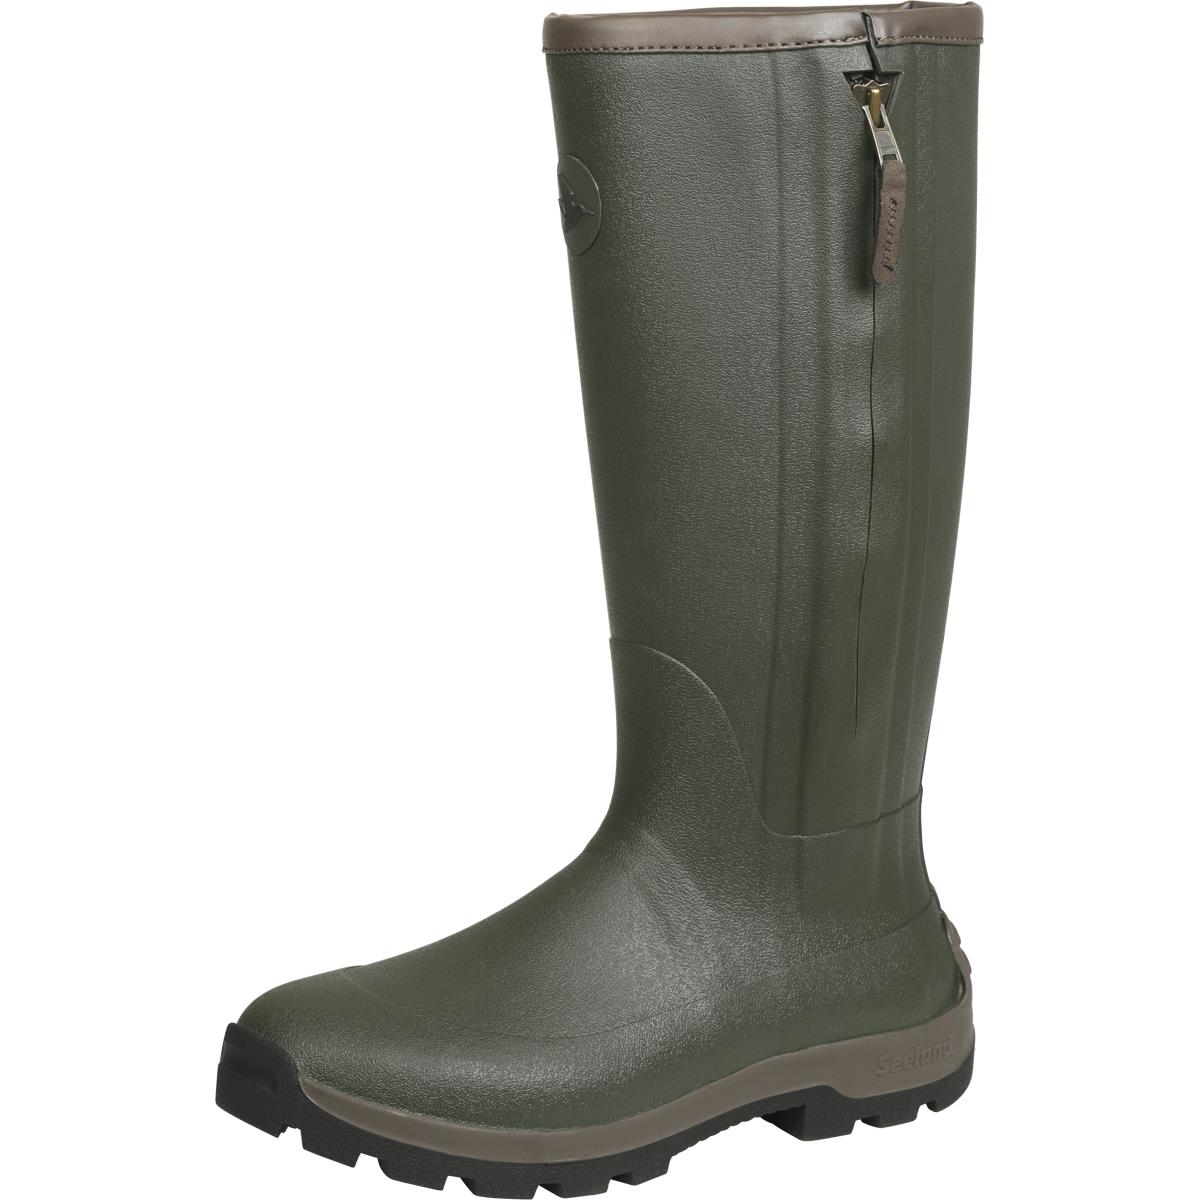 Seeland Mens Noble Zip Wellington Boots Questions & Answers